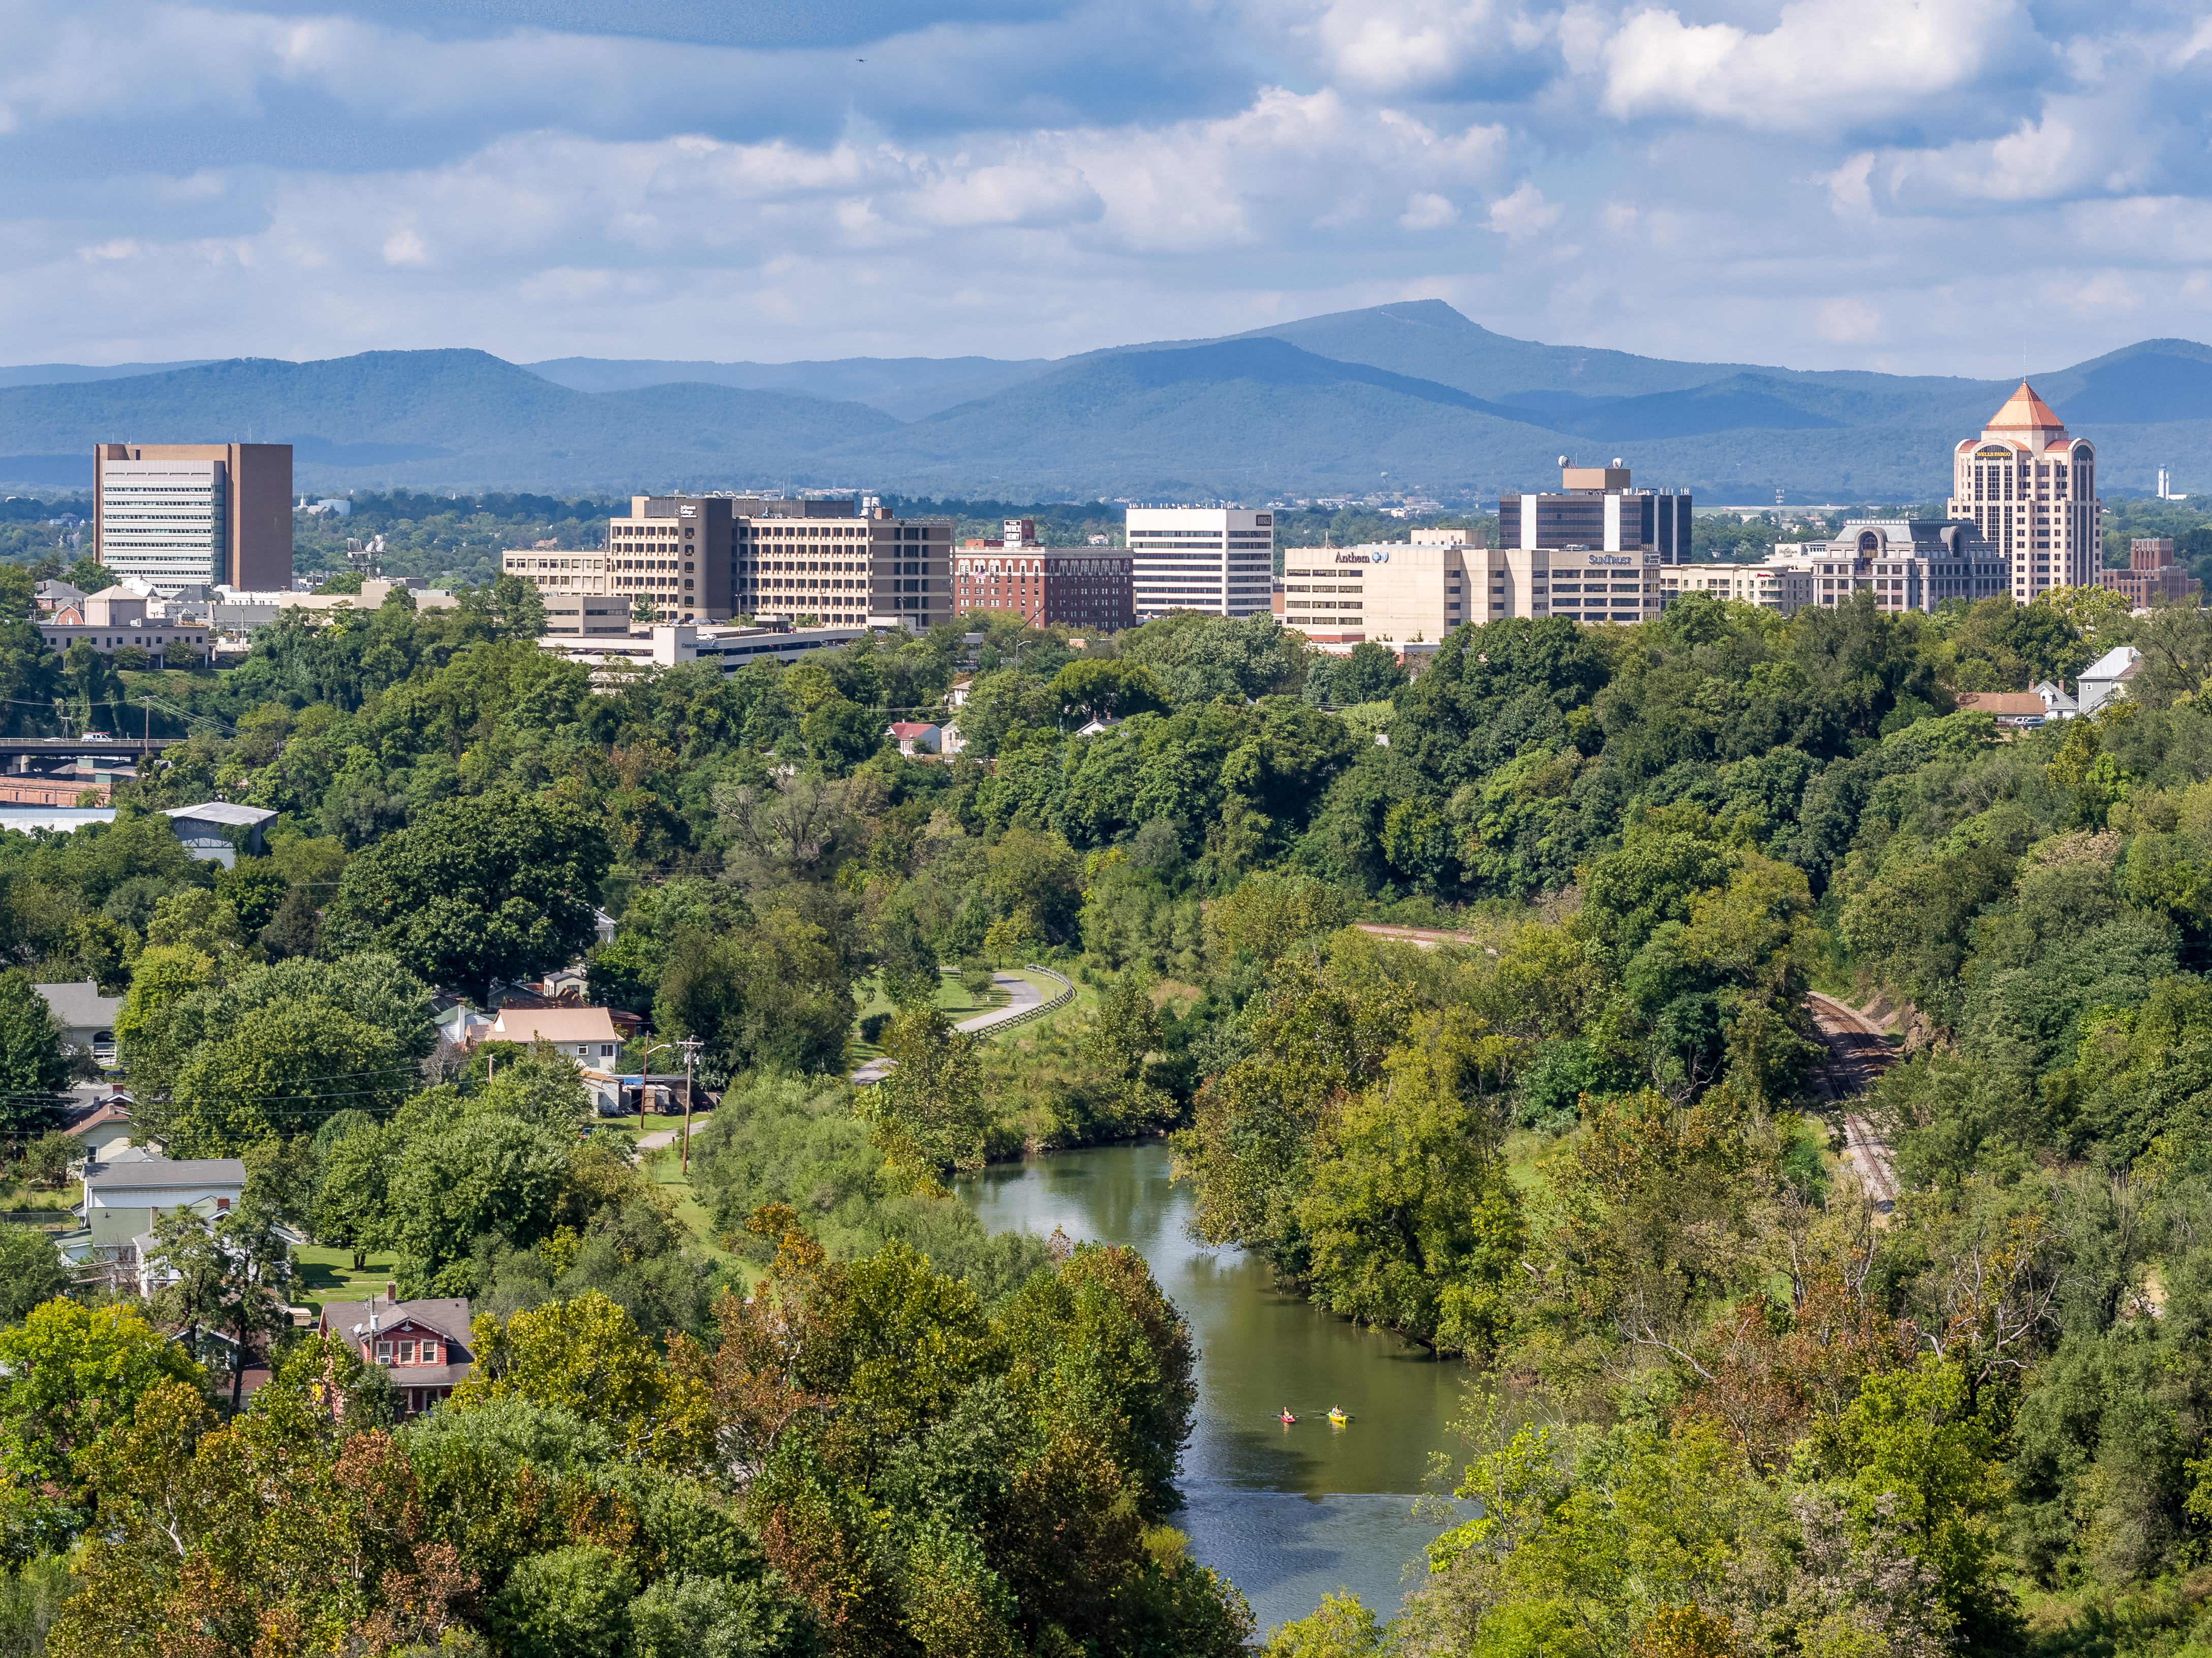 Roanoke River in Virginia's Blue Ridge wins third place for 2023 USA Today 10Best Contest